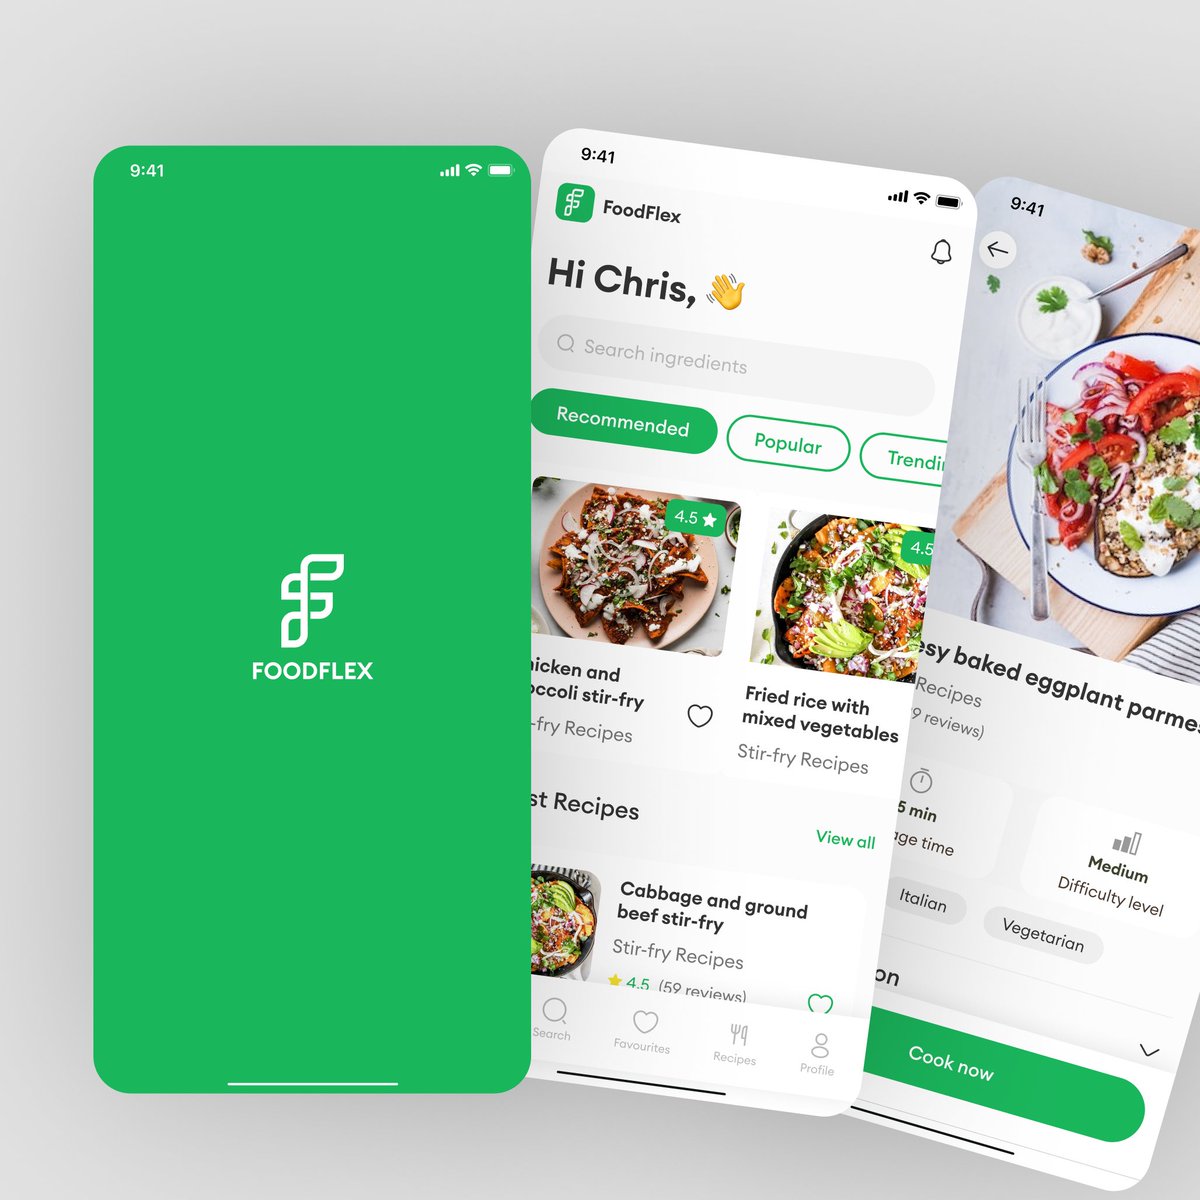 Sneak peek to the design I'm working on! ✨ Introducing FoodFlex, an app that allows users search for one or several ingredients, in order to find recipes to prepare with those ingredients. Full case study soon!!! #uiuxdesign #mobileappdesign #productdesign